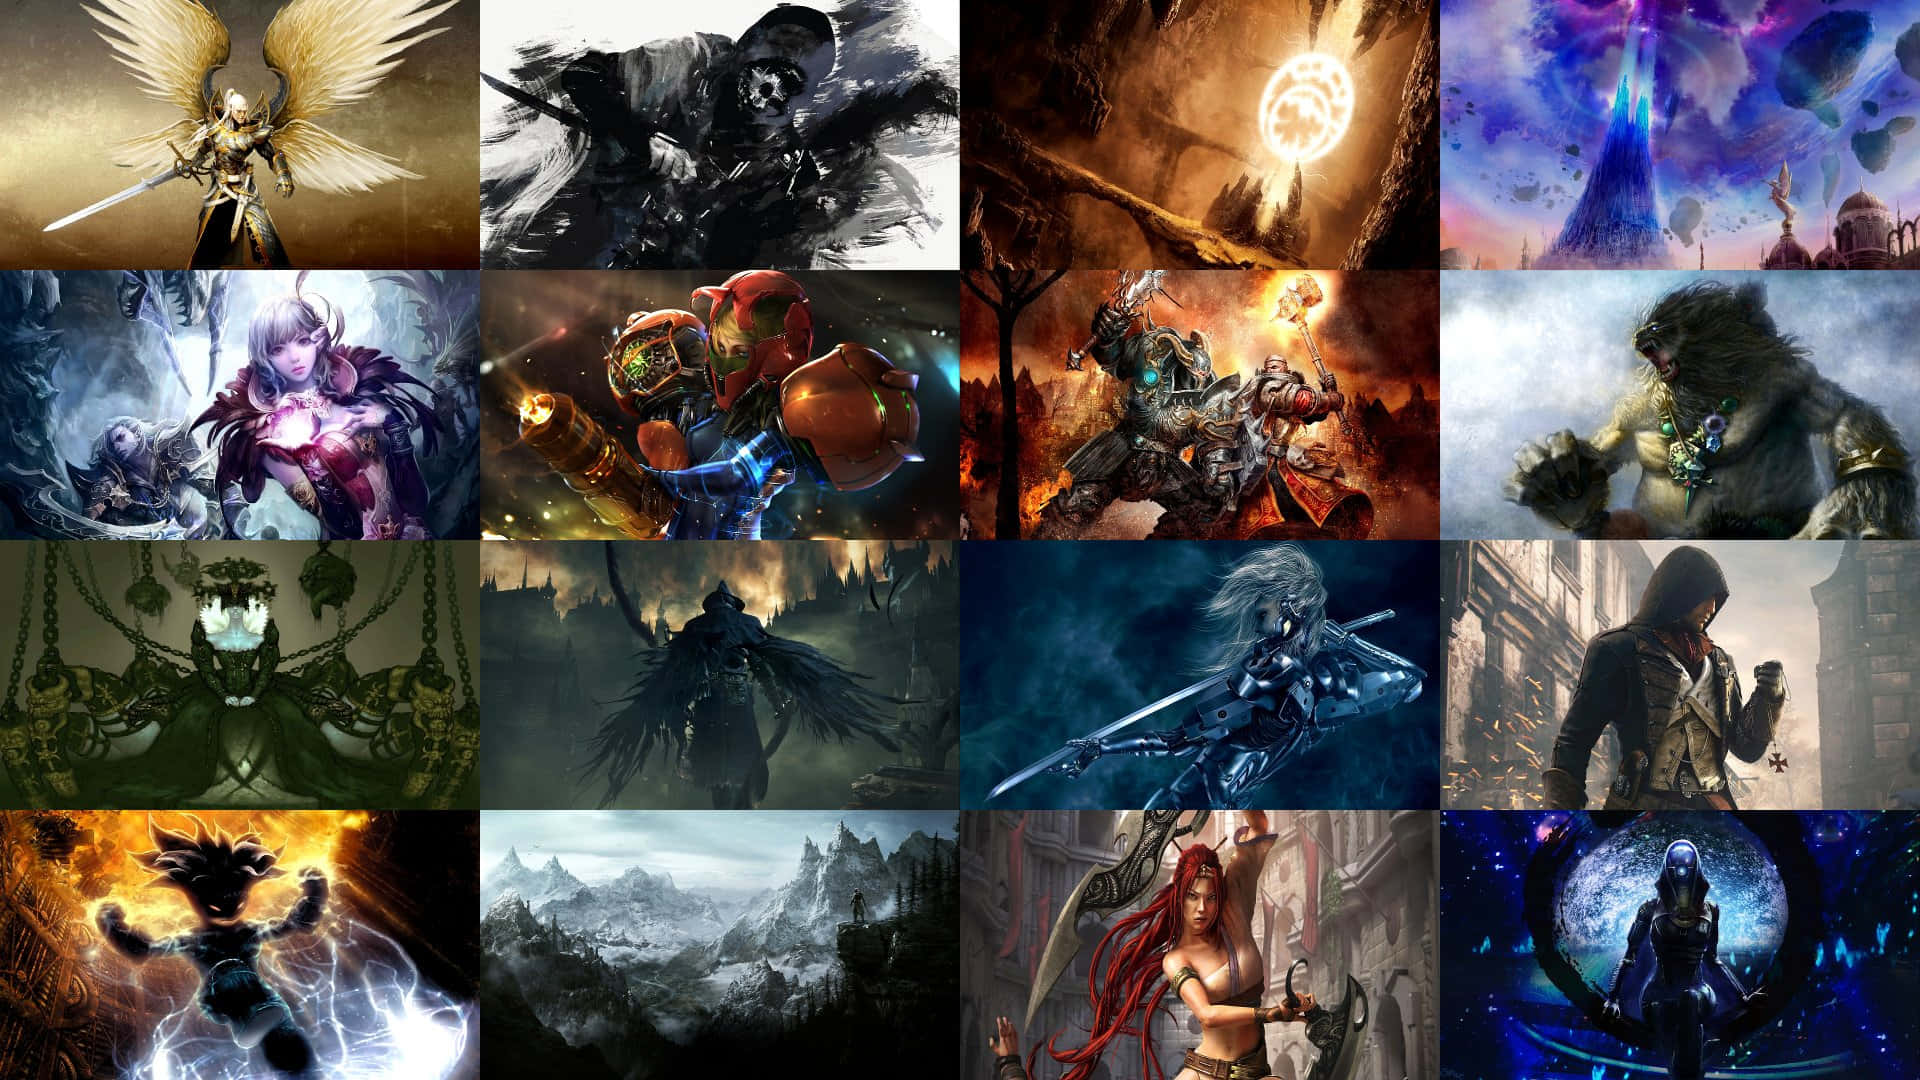 Take Your Pick of These Exciting Online Games Wallpaper